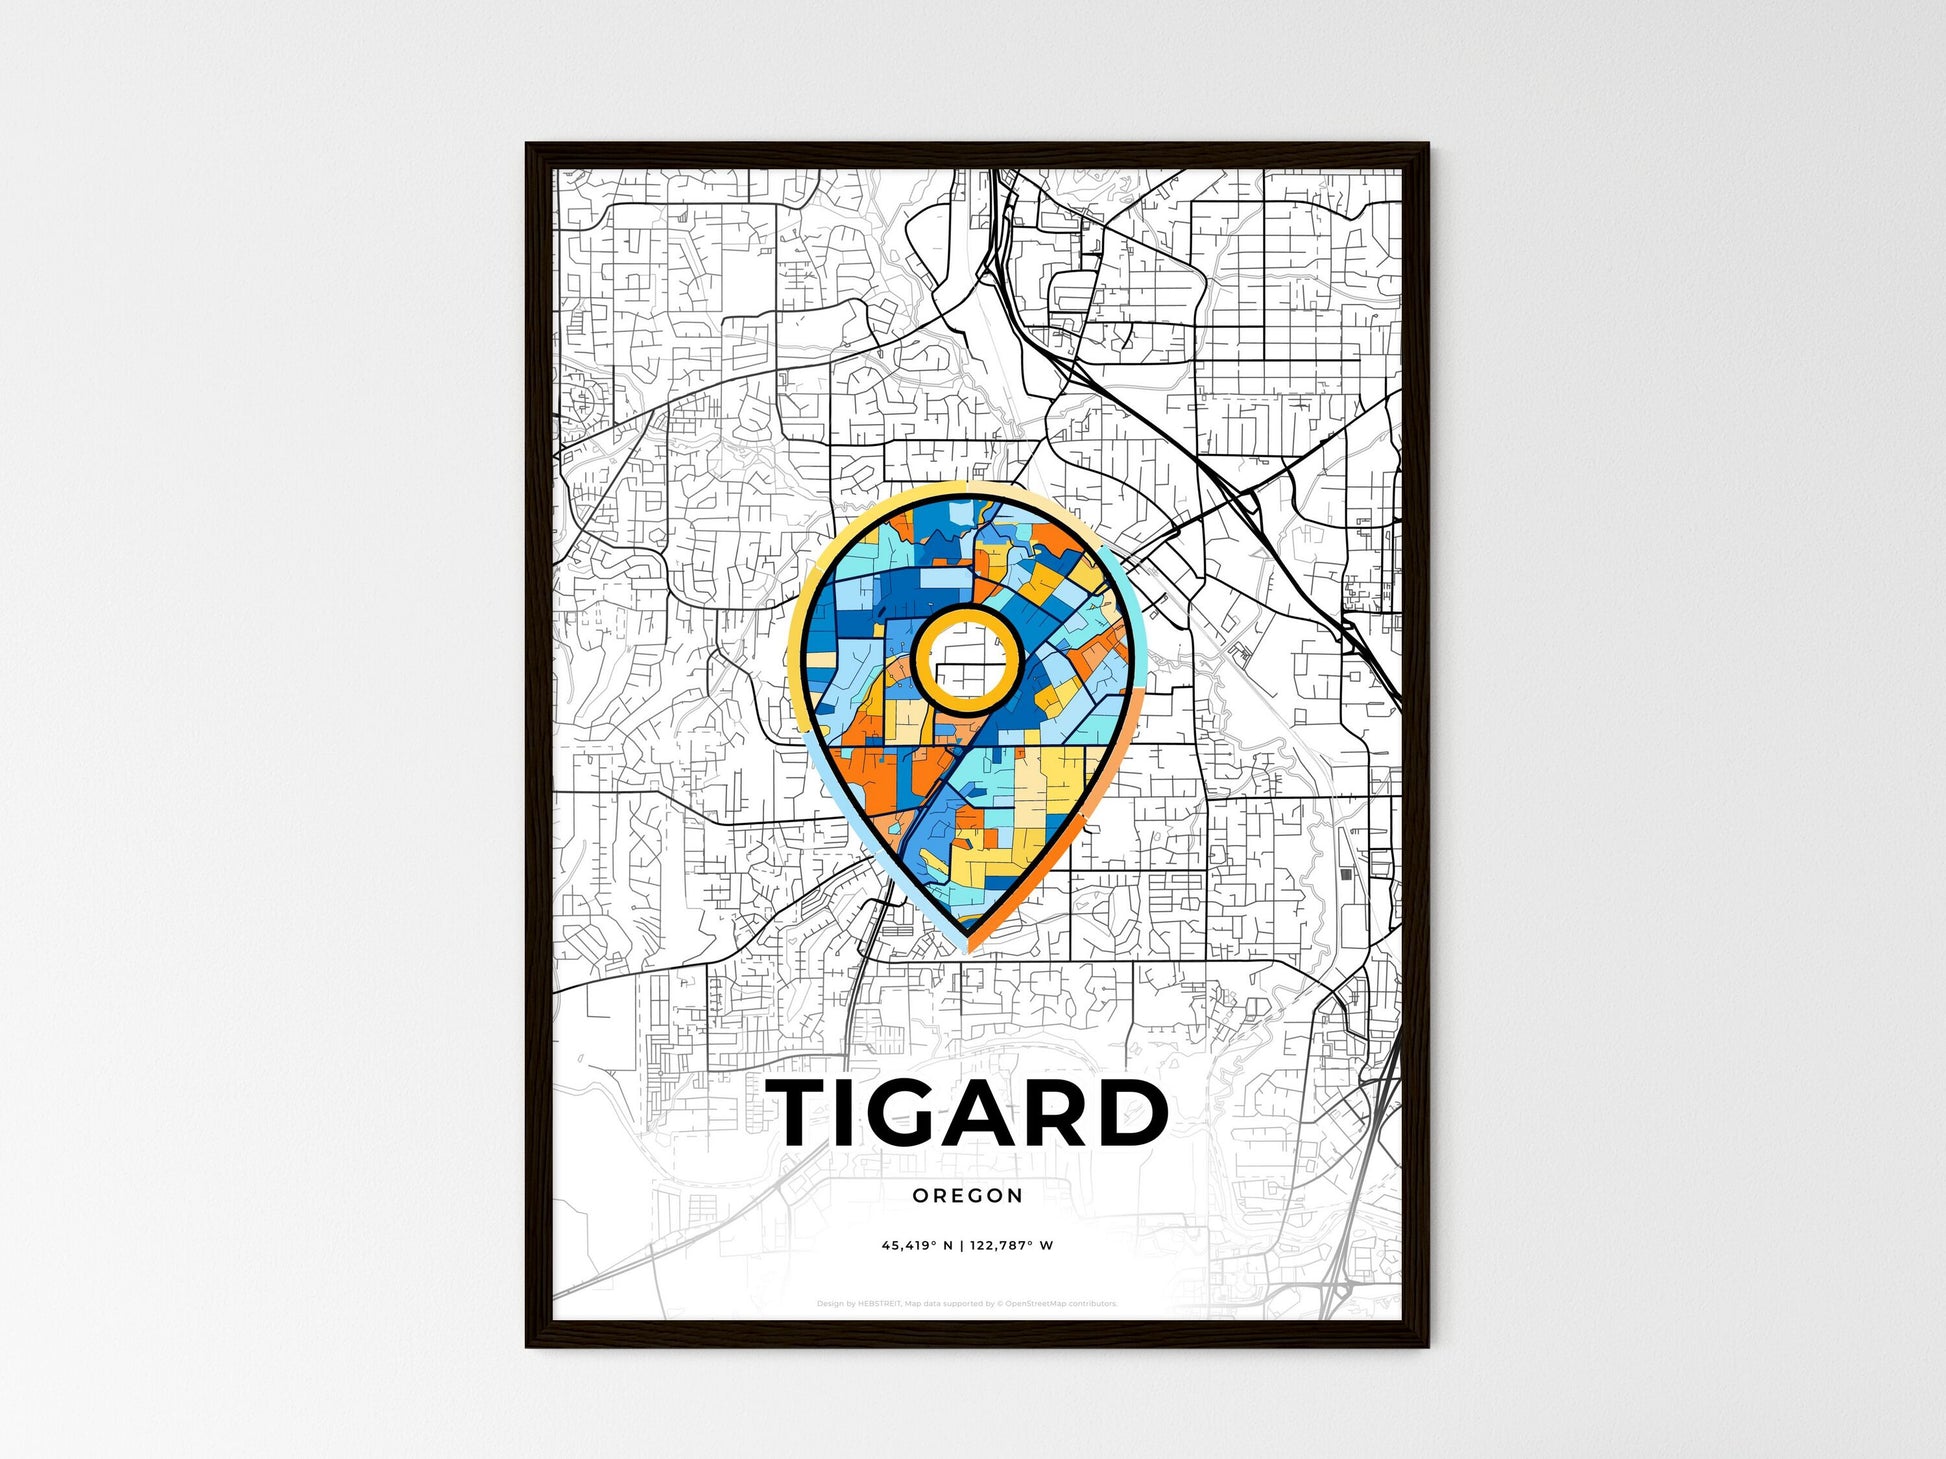 TIGARD OREGON minimal art map with a colorful icon. Style 1